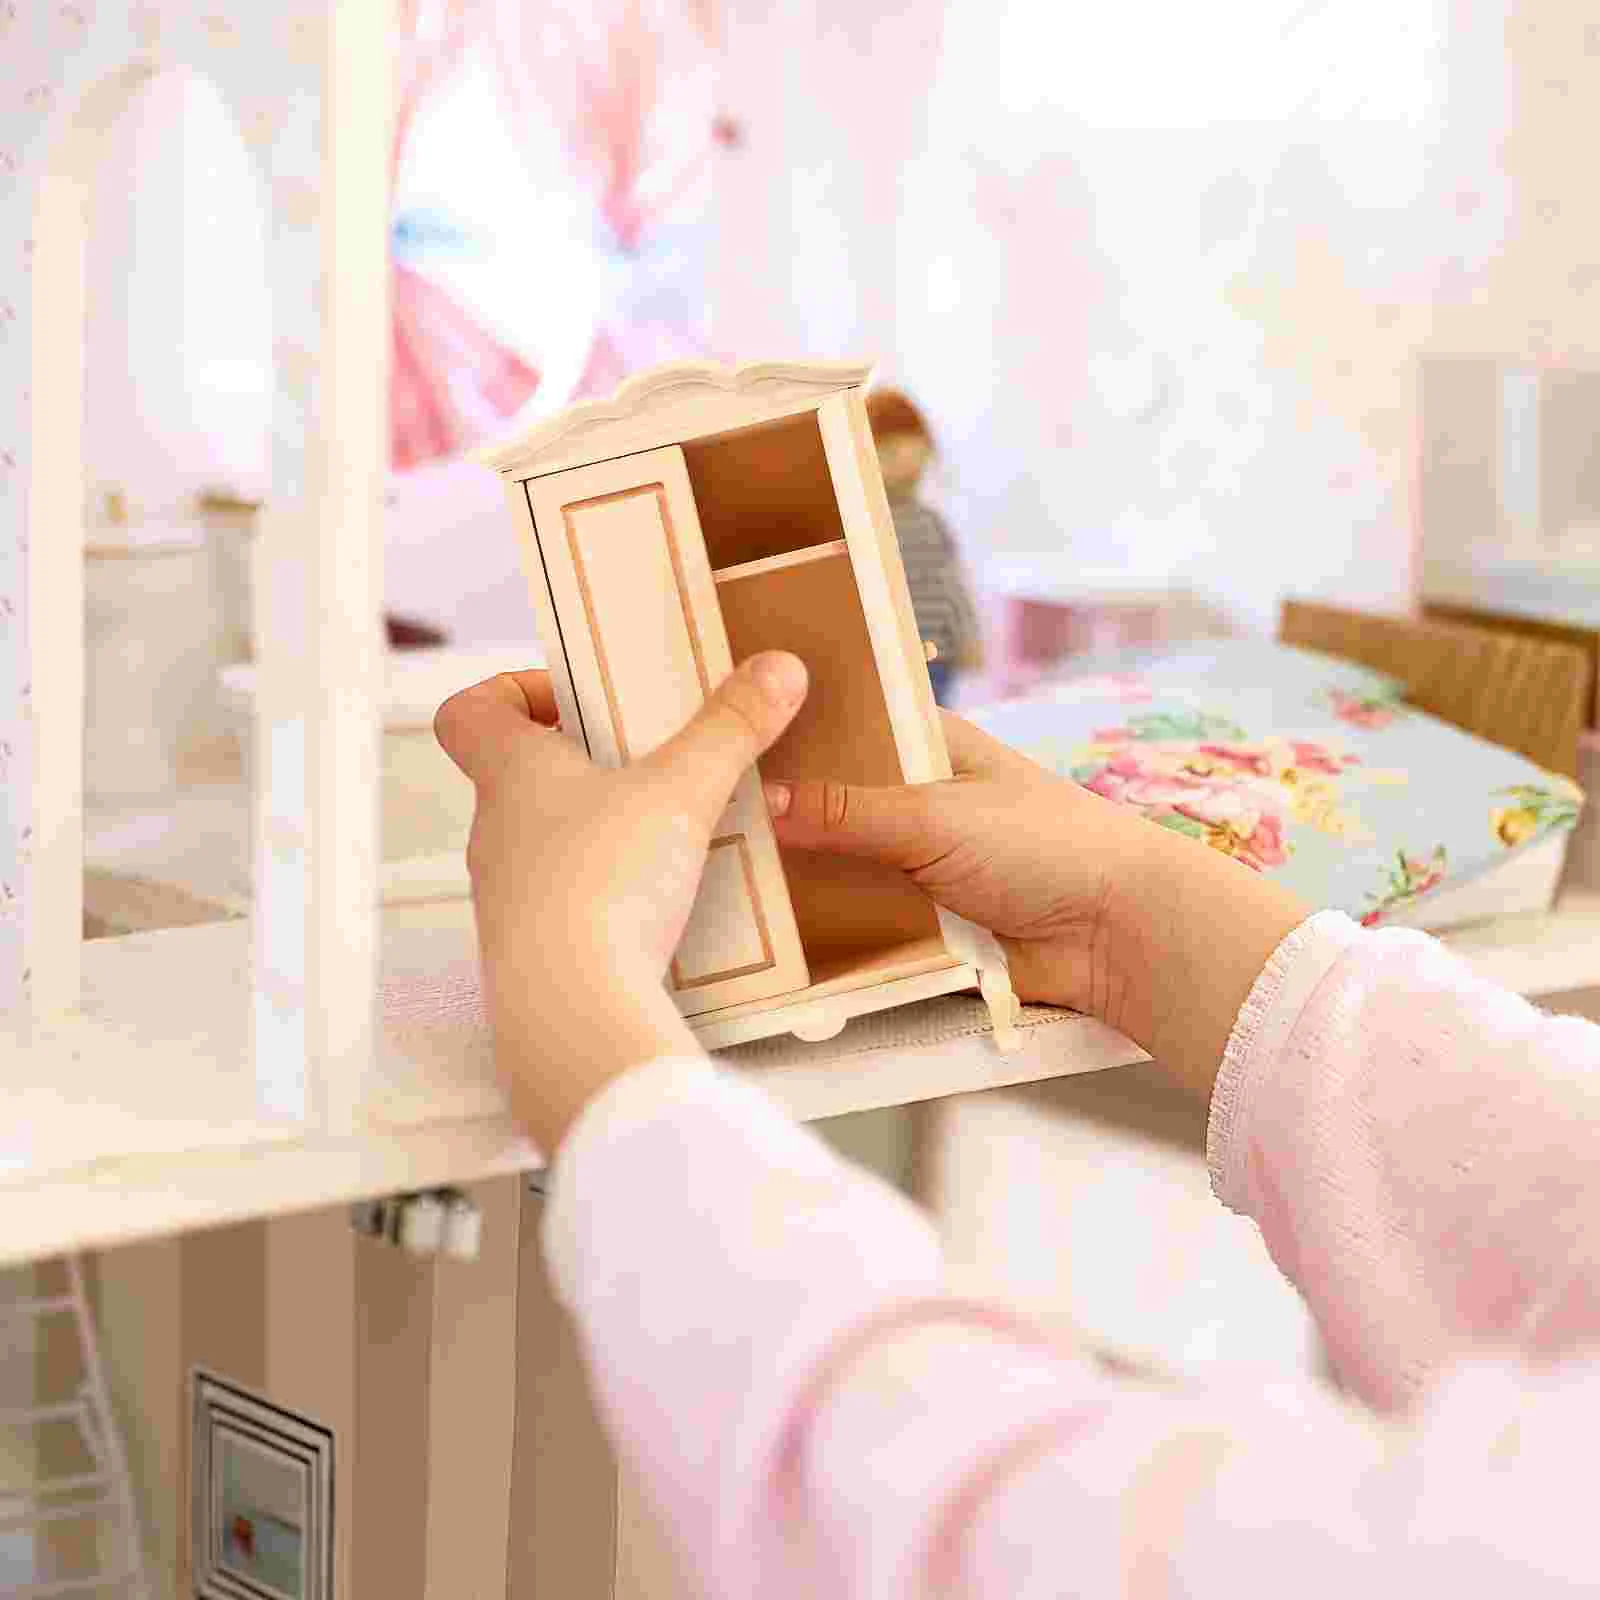 

Cabinet Wardrobe Model Toy 1 12 Simulation Miniature Bedroom Furniture Wooden House Decor Accessories